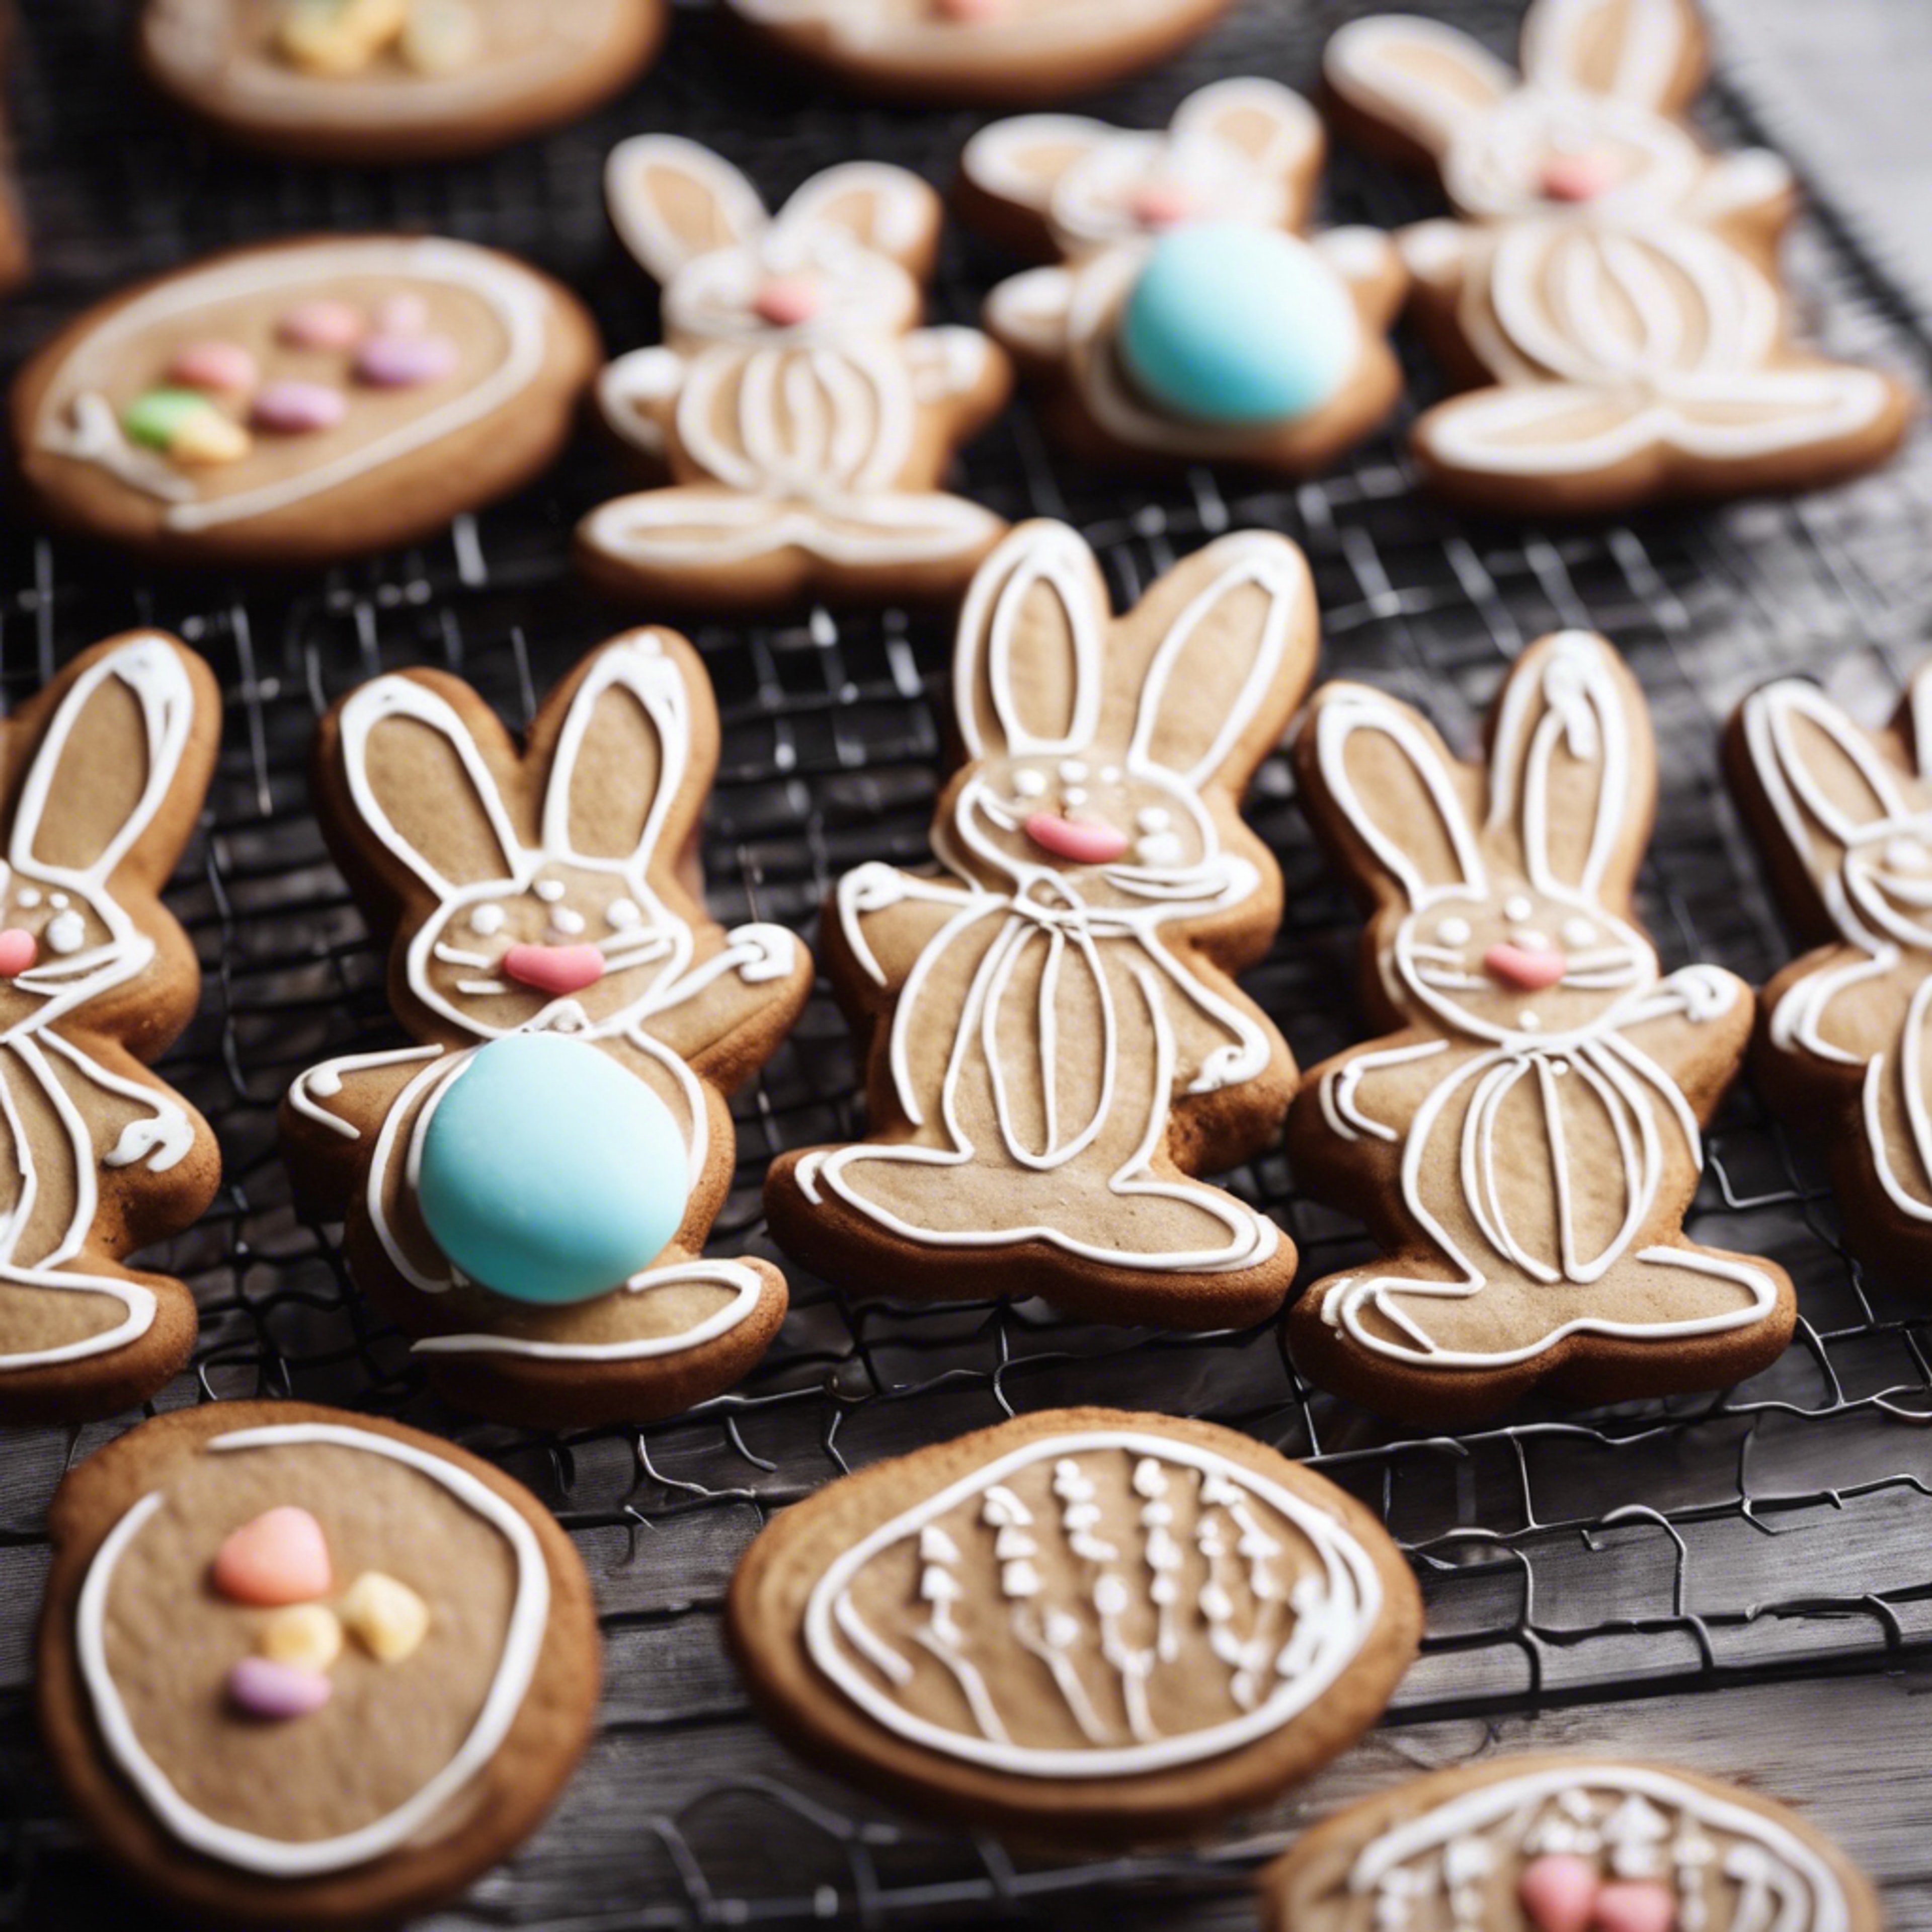 Homemade gingerbread cookies shaped like Easter bunnies and eggs, cooling on a rack. Tapéta[c62694eb033d400aa62f]